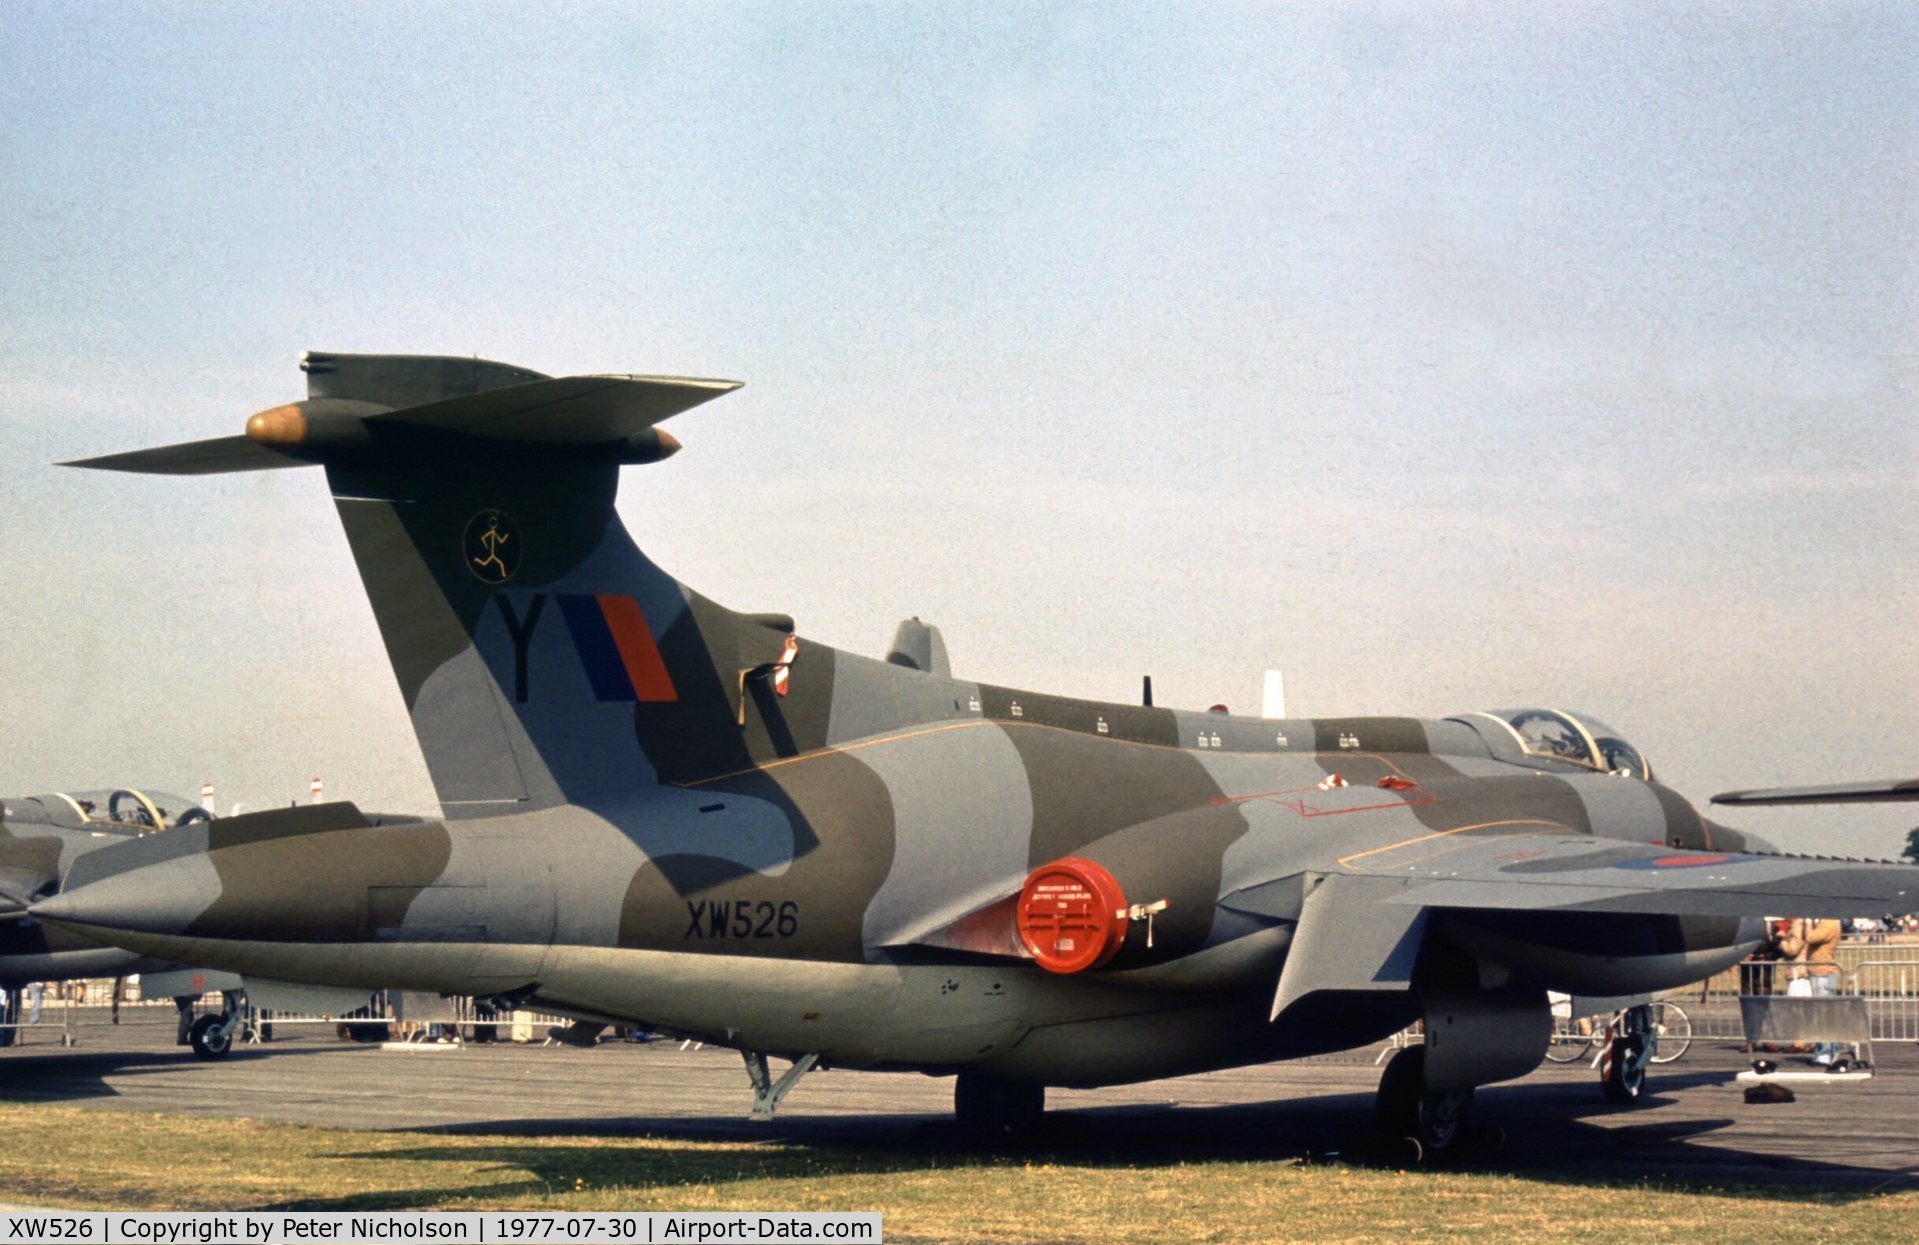 XW526, 1970 Hawker Siddeley Buccaneer S.2B C/N B3-02-69, Buccaneer S.2B of 16 Squadron on display at the 1977 Royal Review at RAF Finningley.